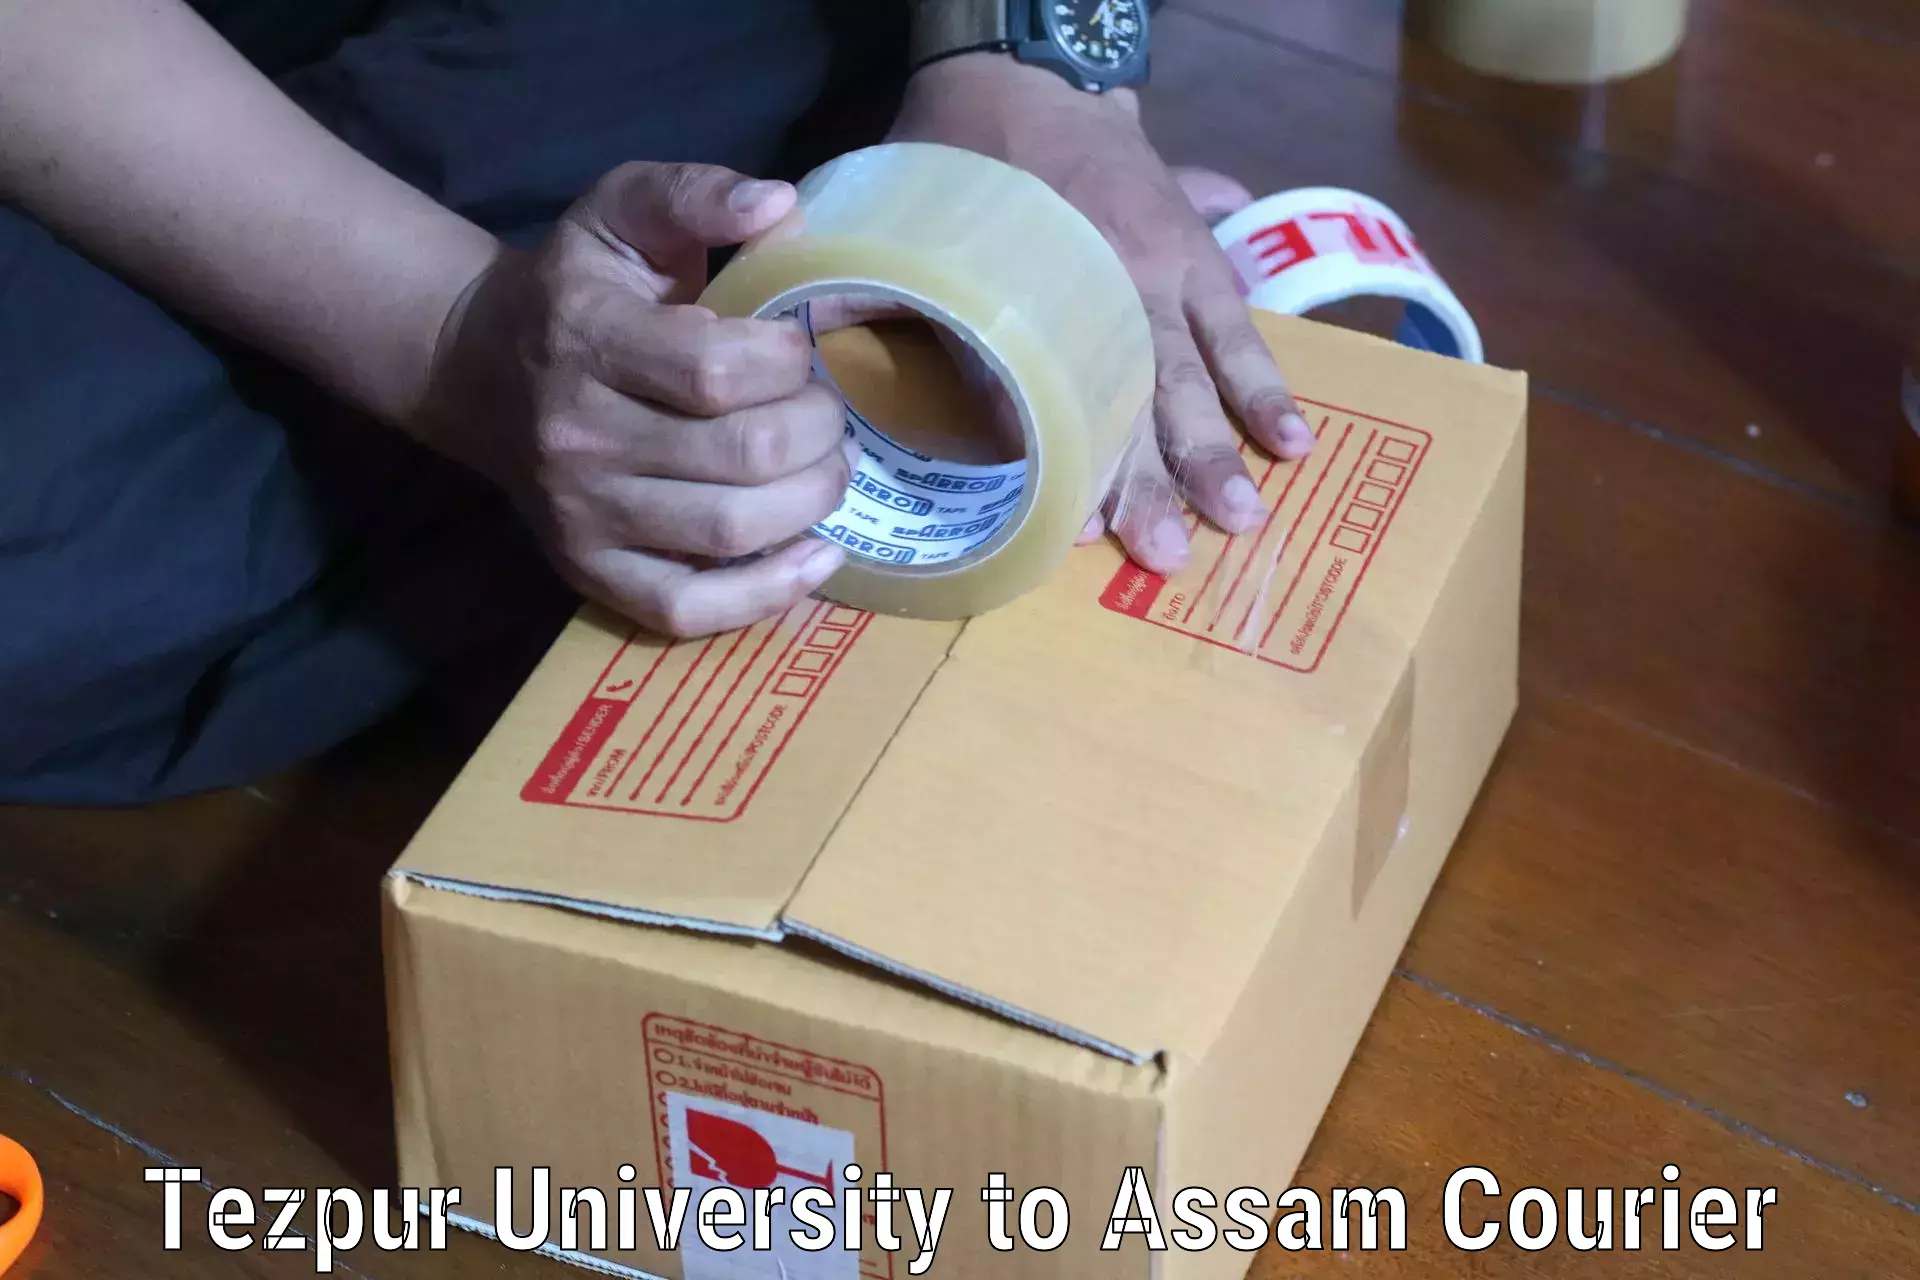 Custom courier packaging in Tezpur University to Hojai